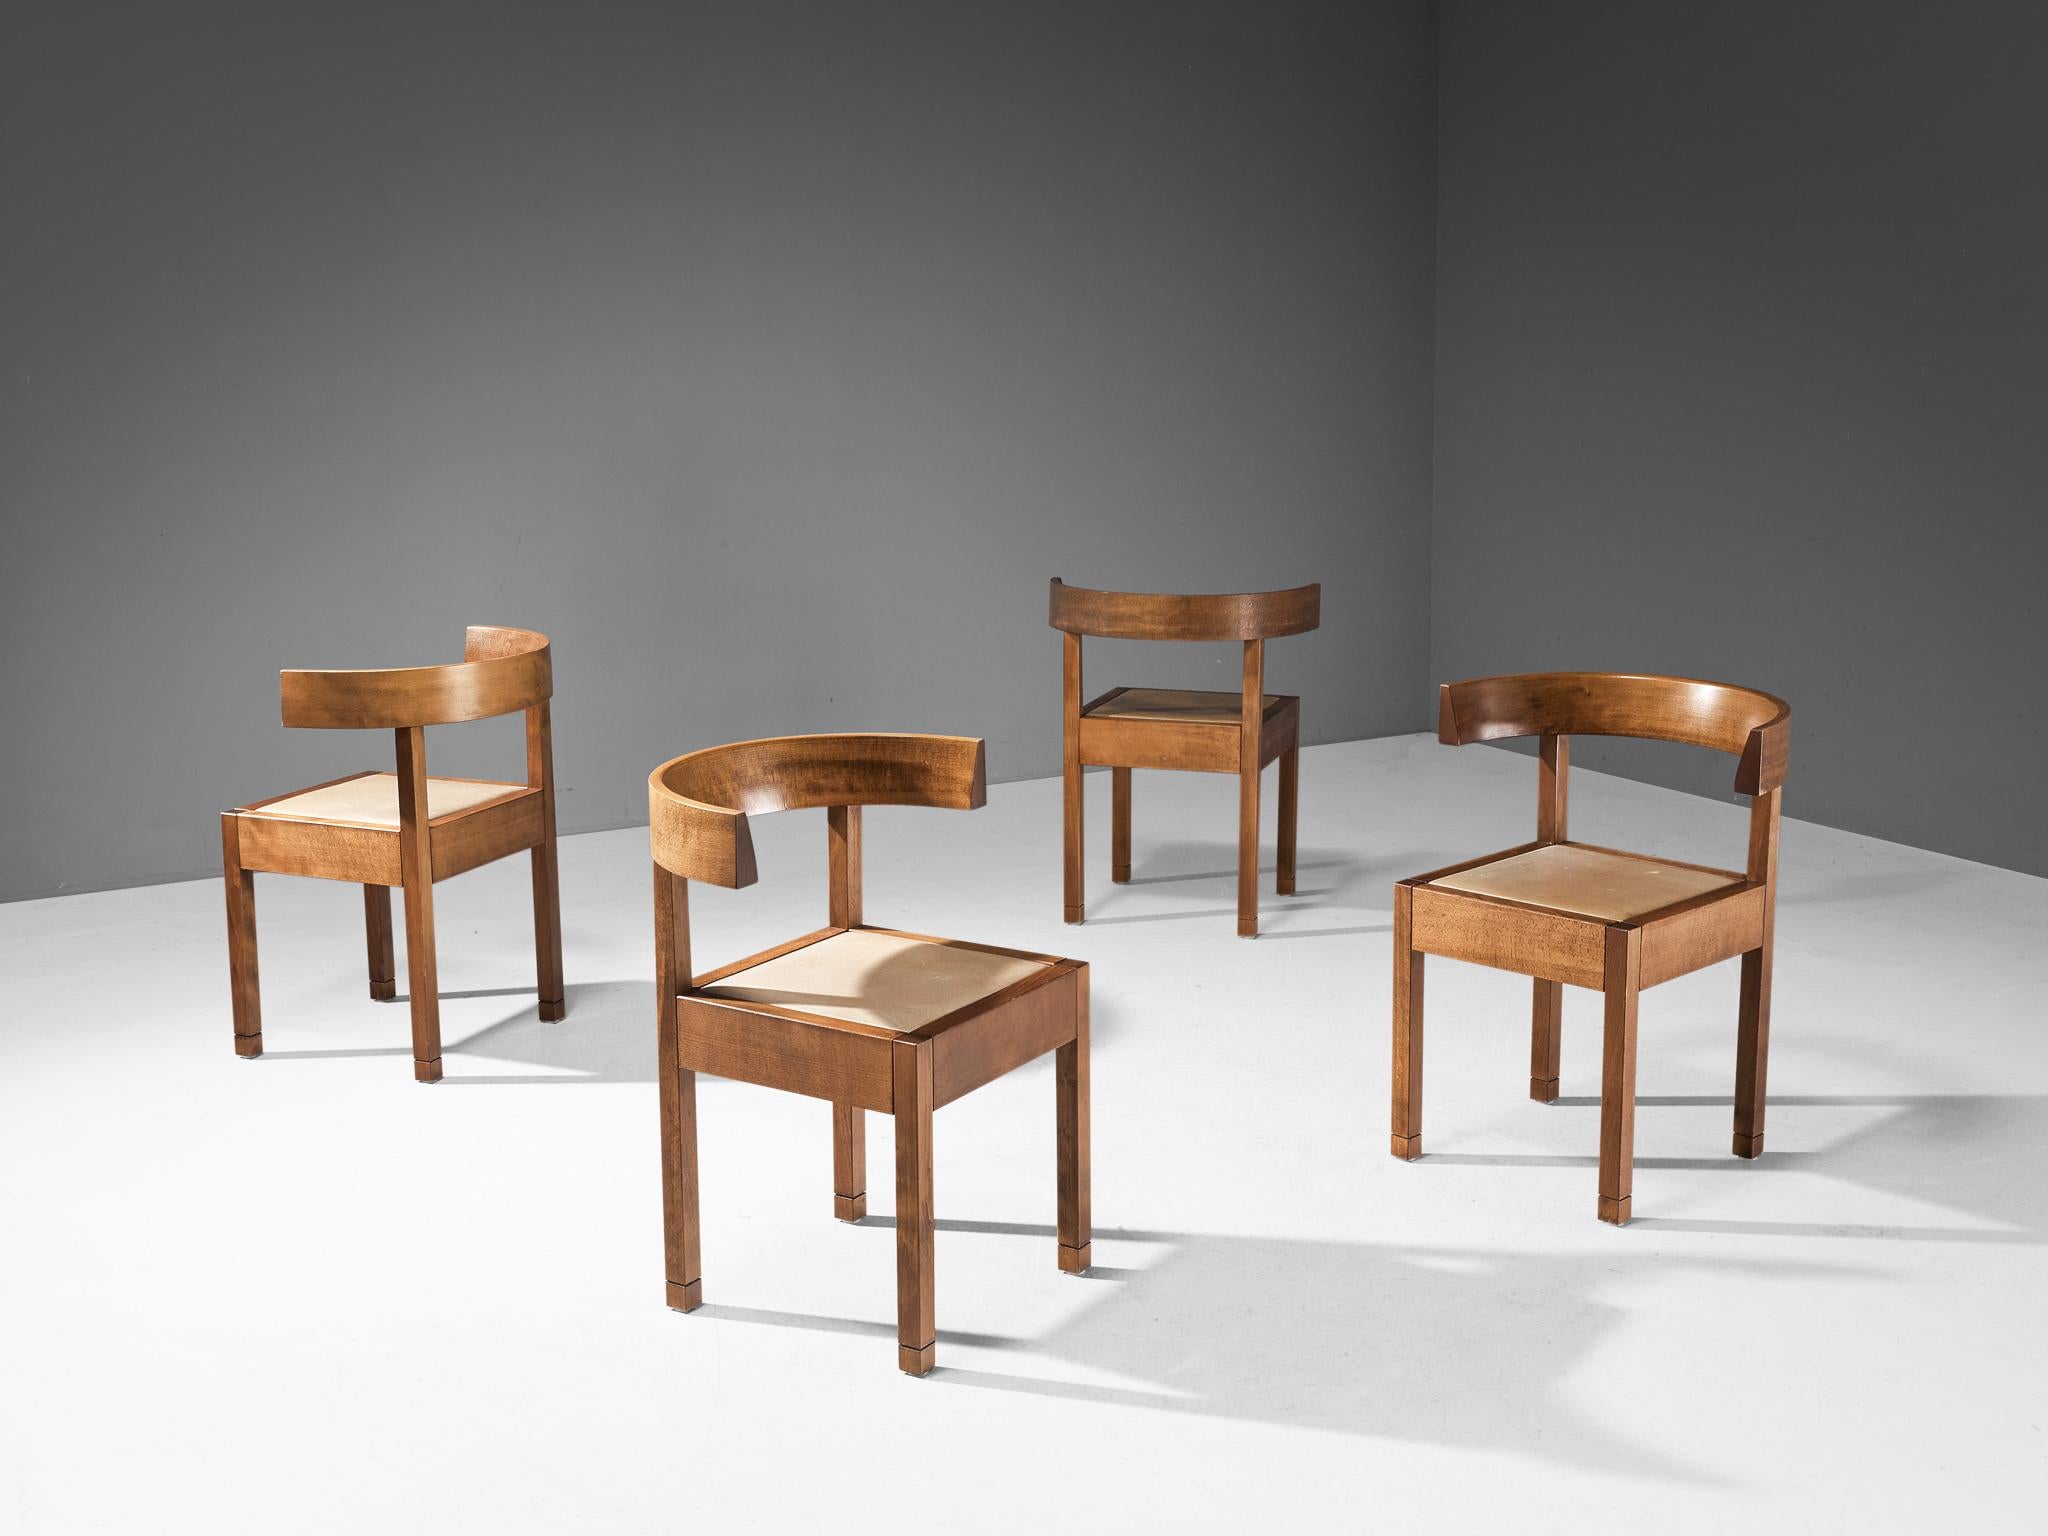 Oswald Mathias Ungers for Draenert, set of four dining 'Leonardo' chairs, beech, leather, Germany, design 1988

This set of 'Leonardo' dining chairs are designed by Oswald Mathias Ungers. Professor Oswald Mathias Ungers was regarded as a strong